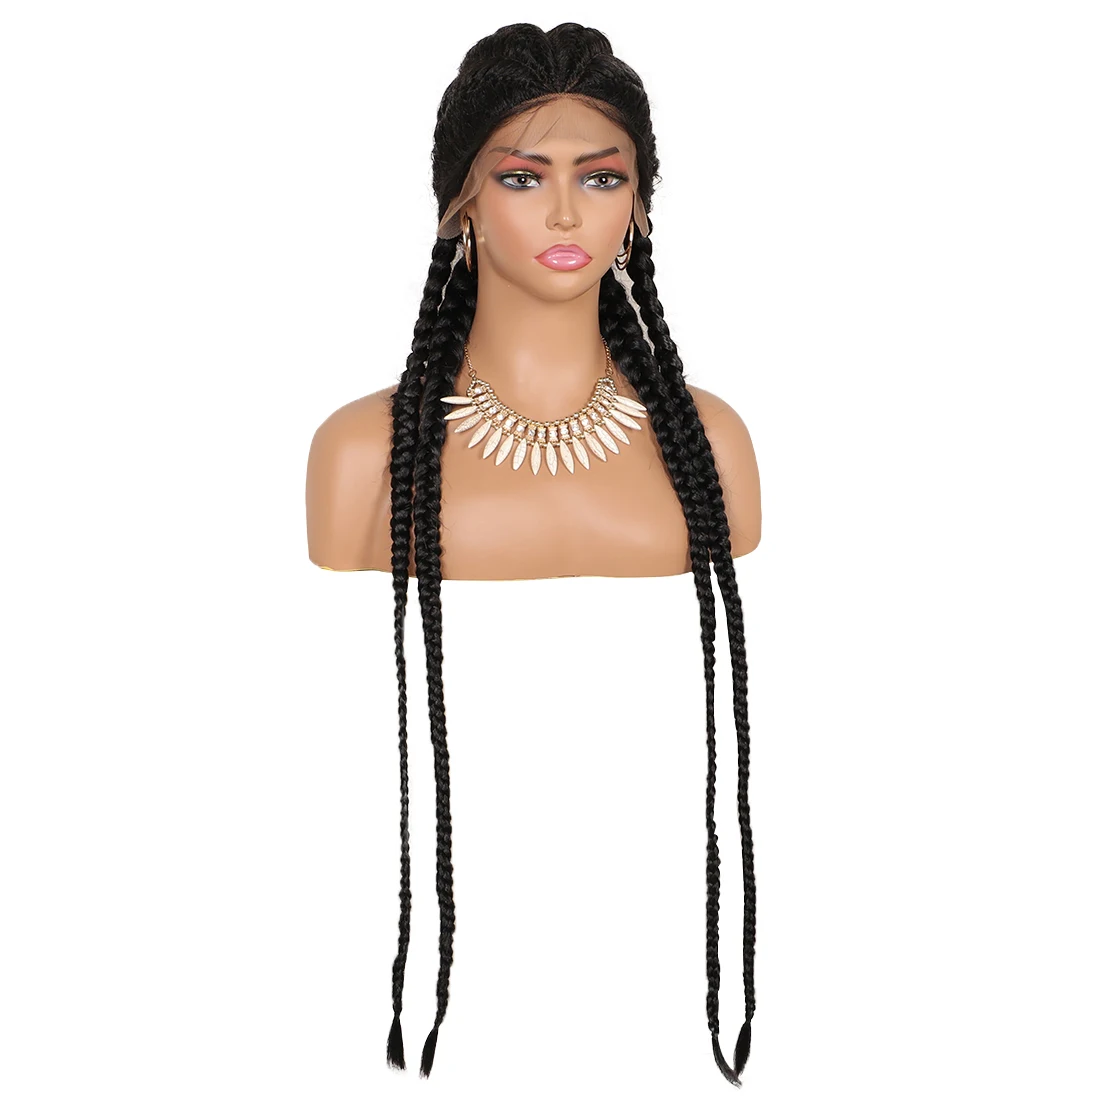 

Youthfee 35 Inches Black Double Dutch Box Braids Wig For Black Women Synthetic Braid Wigs With Baby Hair Lace Front Braided Wigs